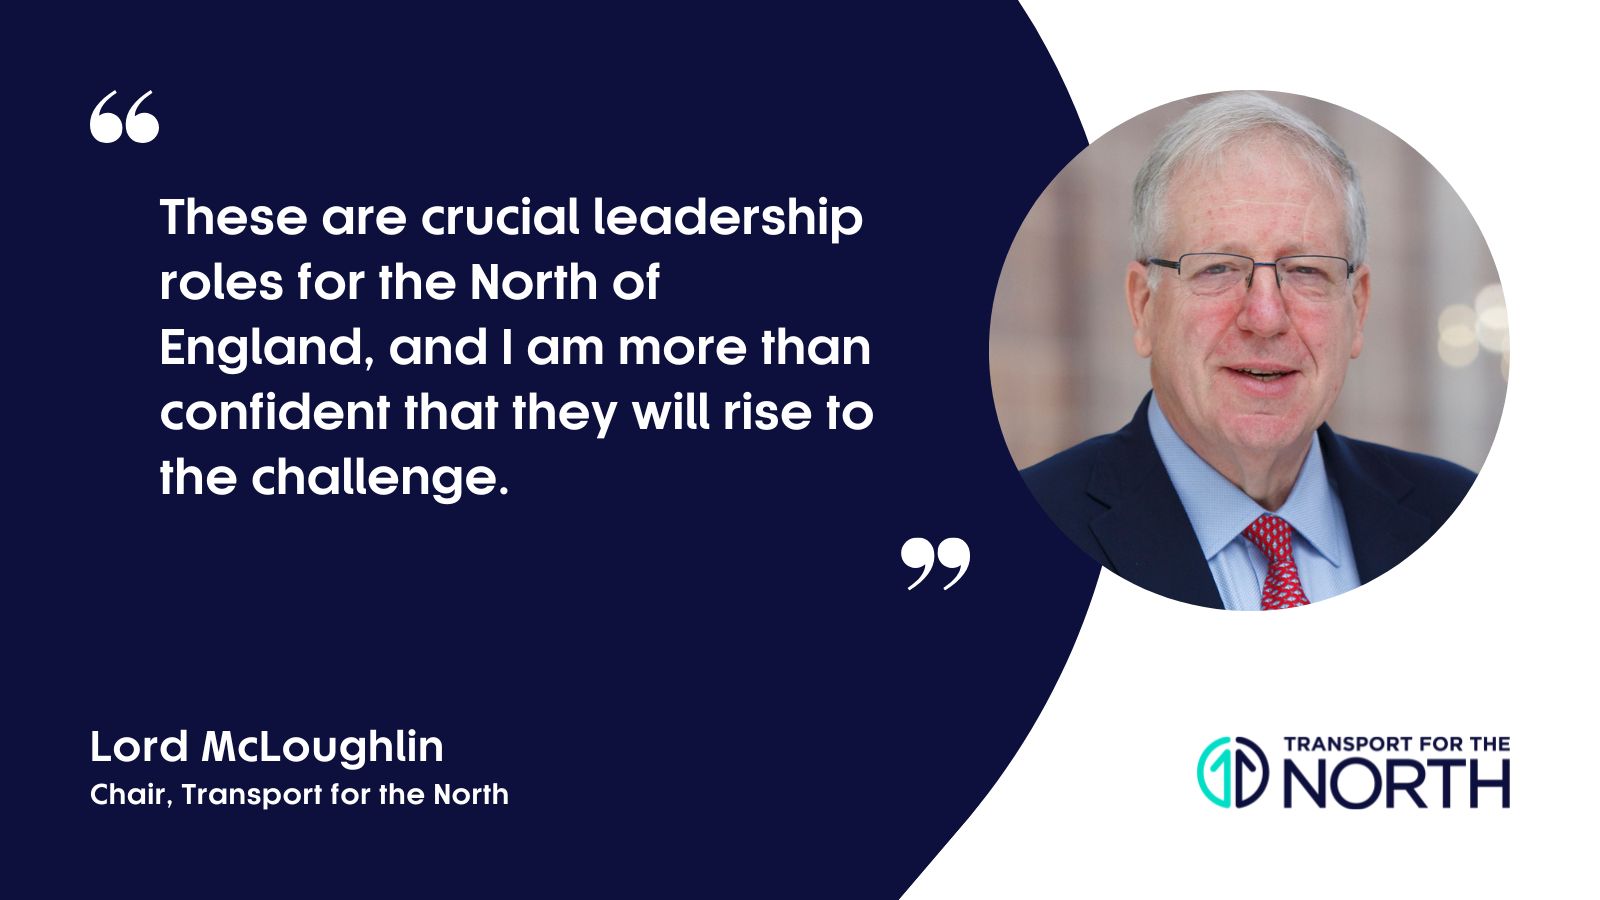 Lord McLoughlin on the two new directors at TfN